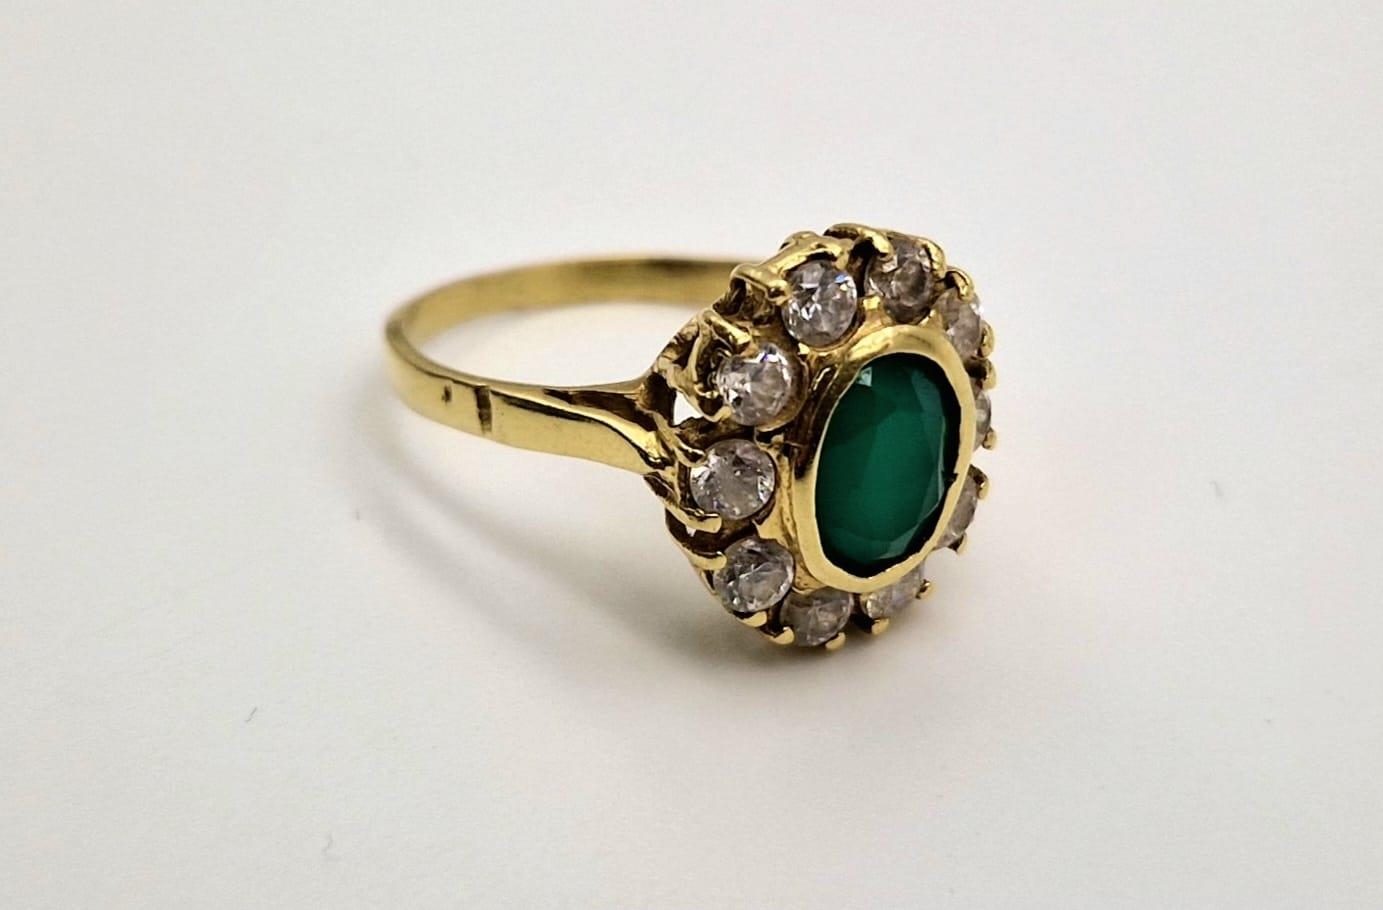 An 18 K yellow gold, stone set cluster ring. Size: Q, weight: 5.6 g. - Image 4 of 7